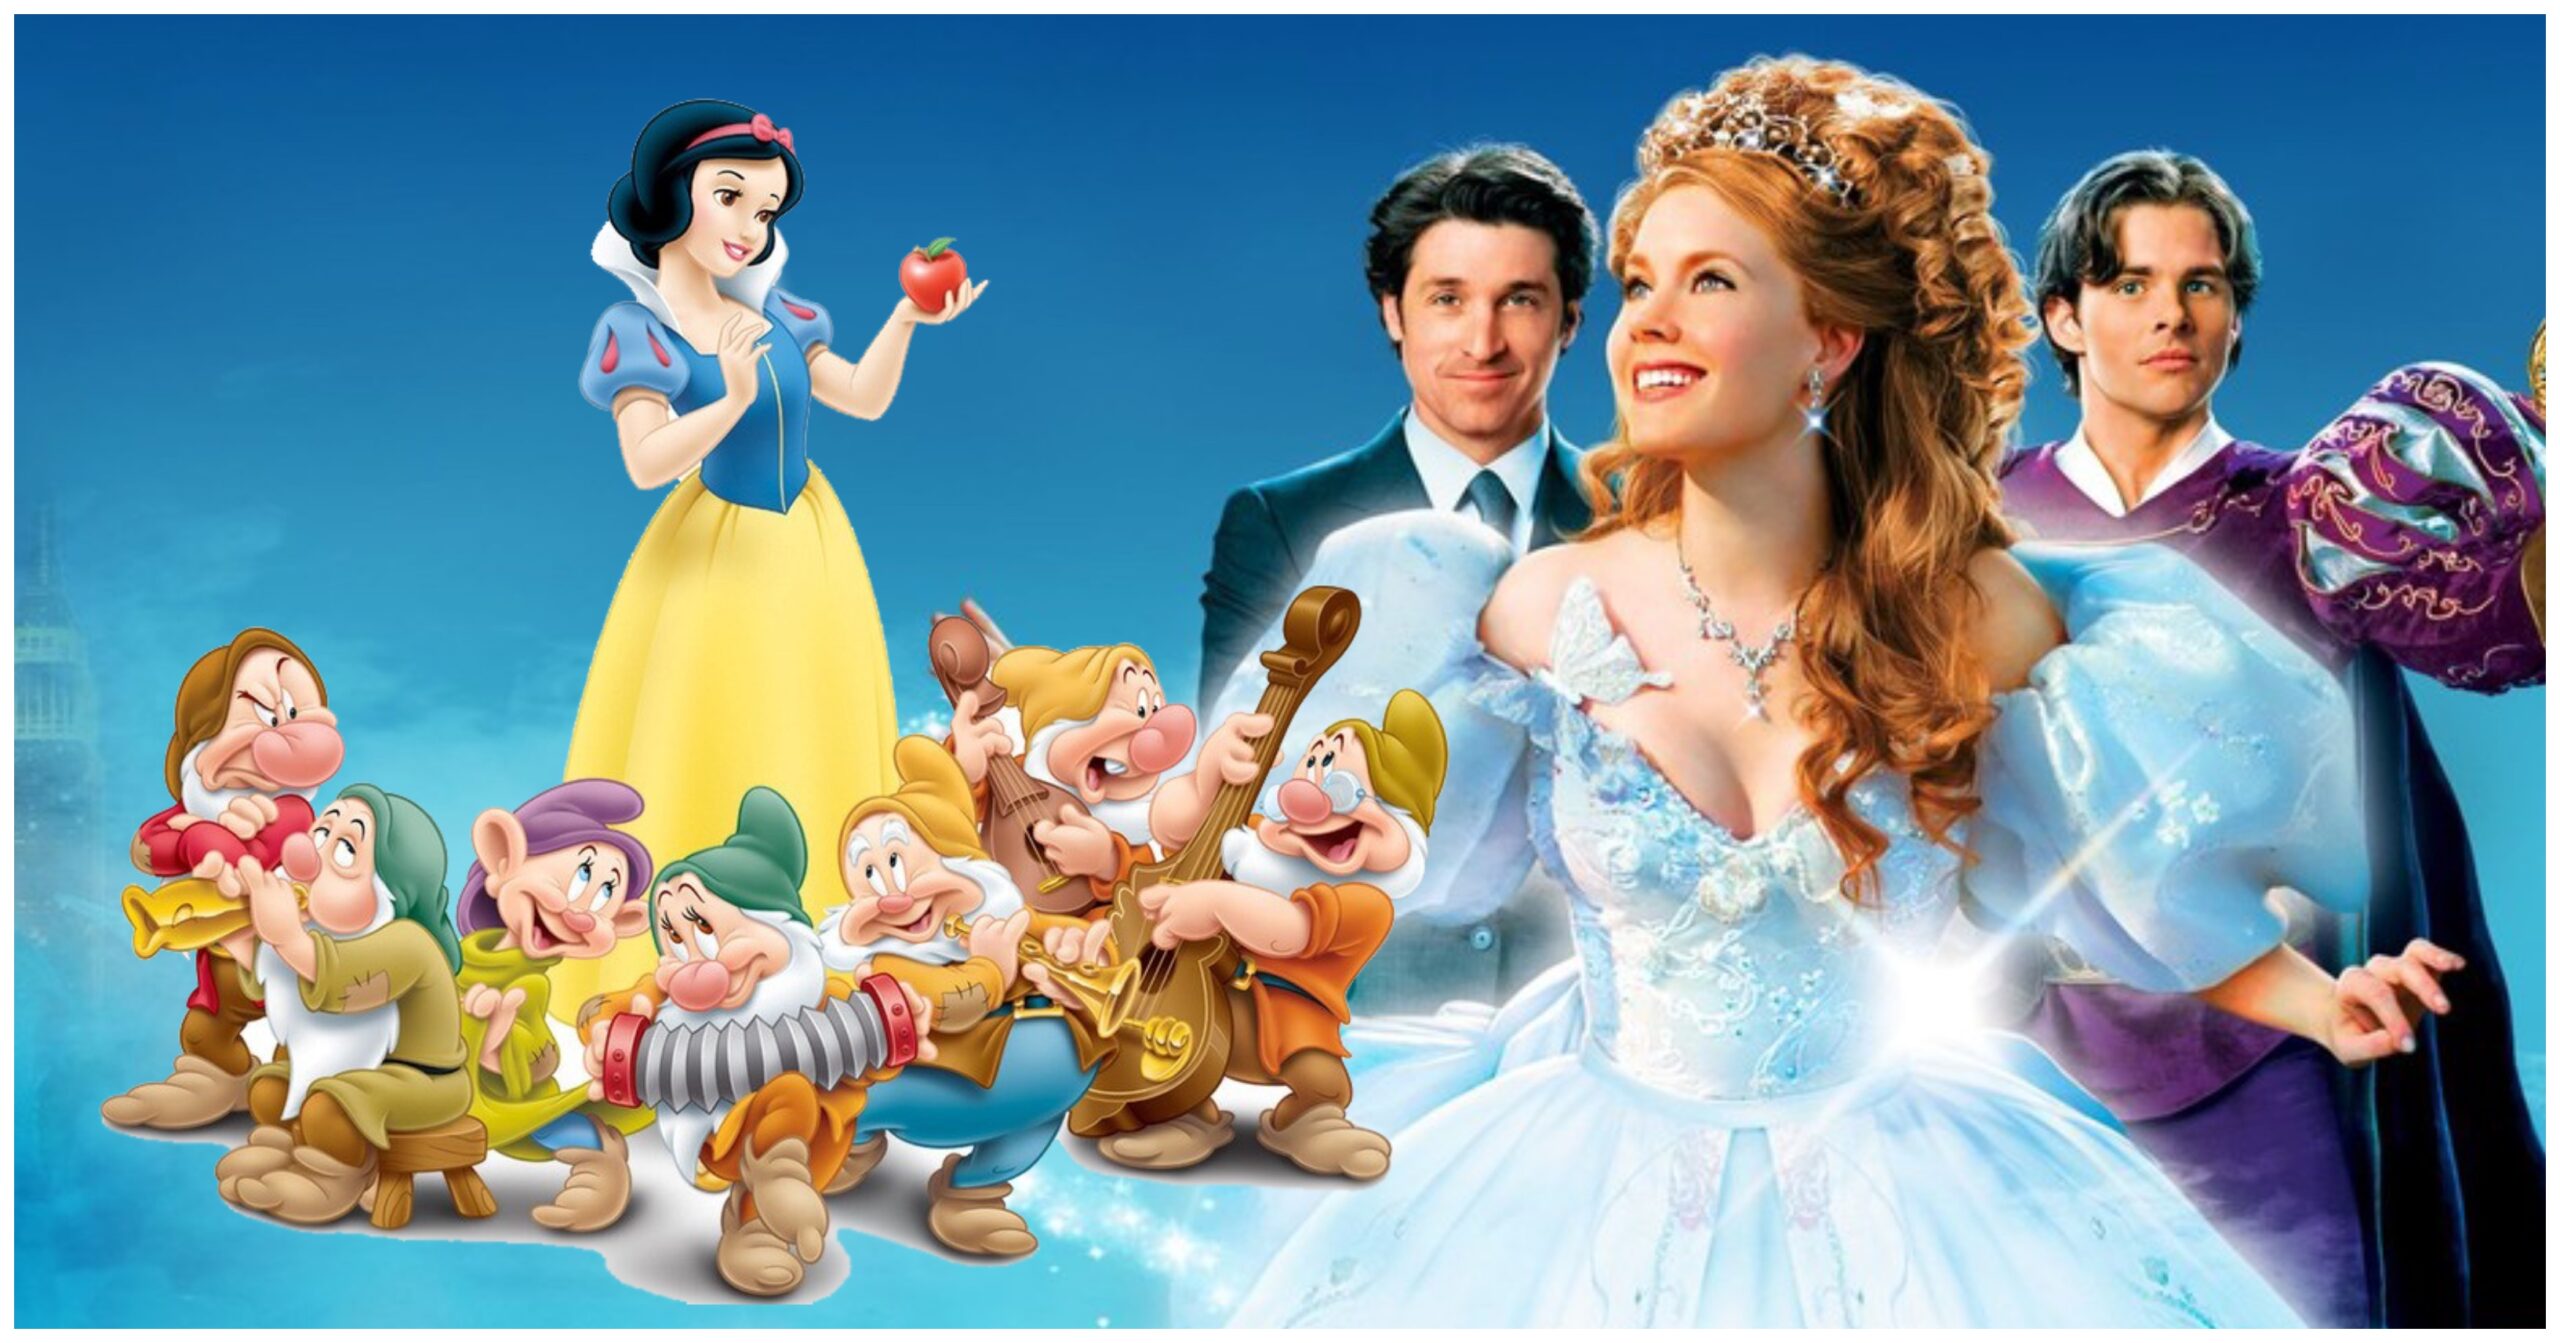 Snow White and the Seven Dwarfs (left) Enchanted Cast (right)